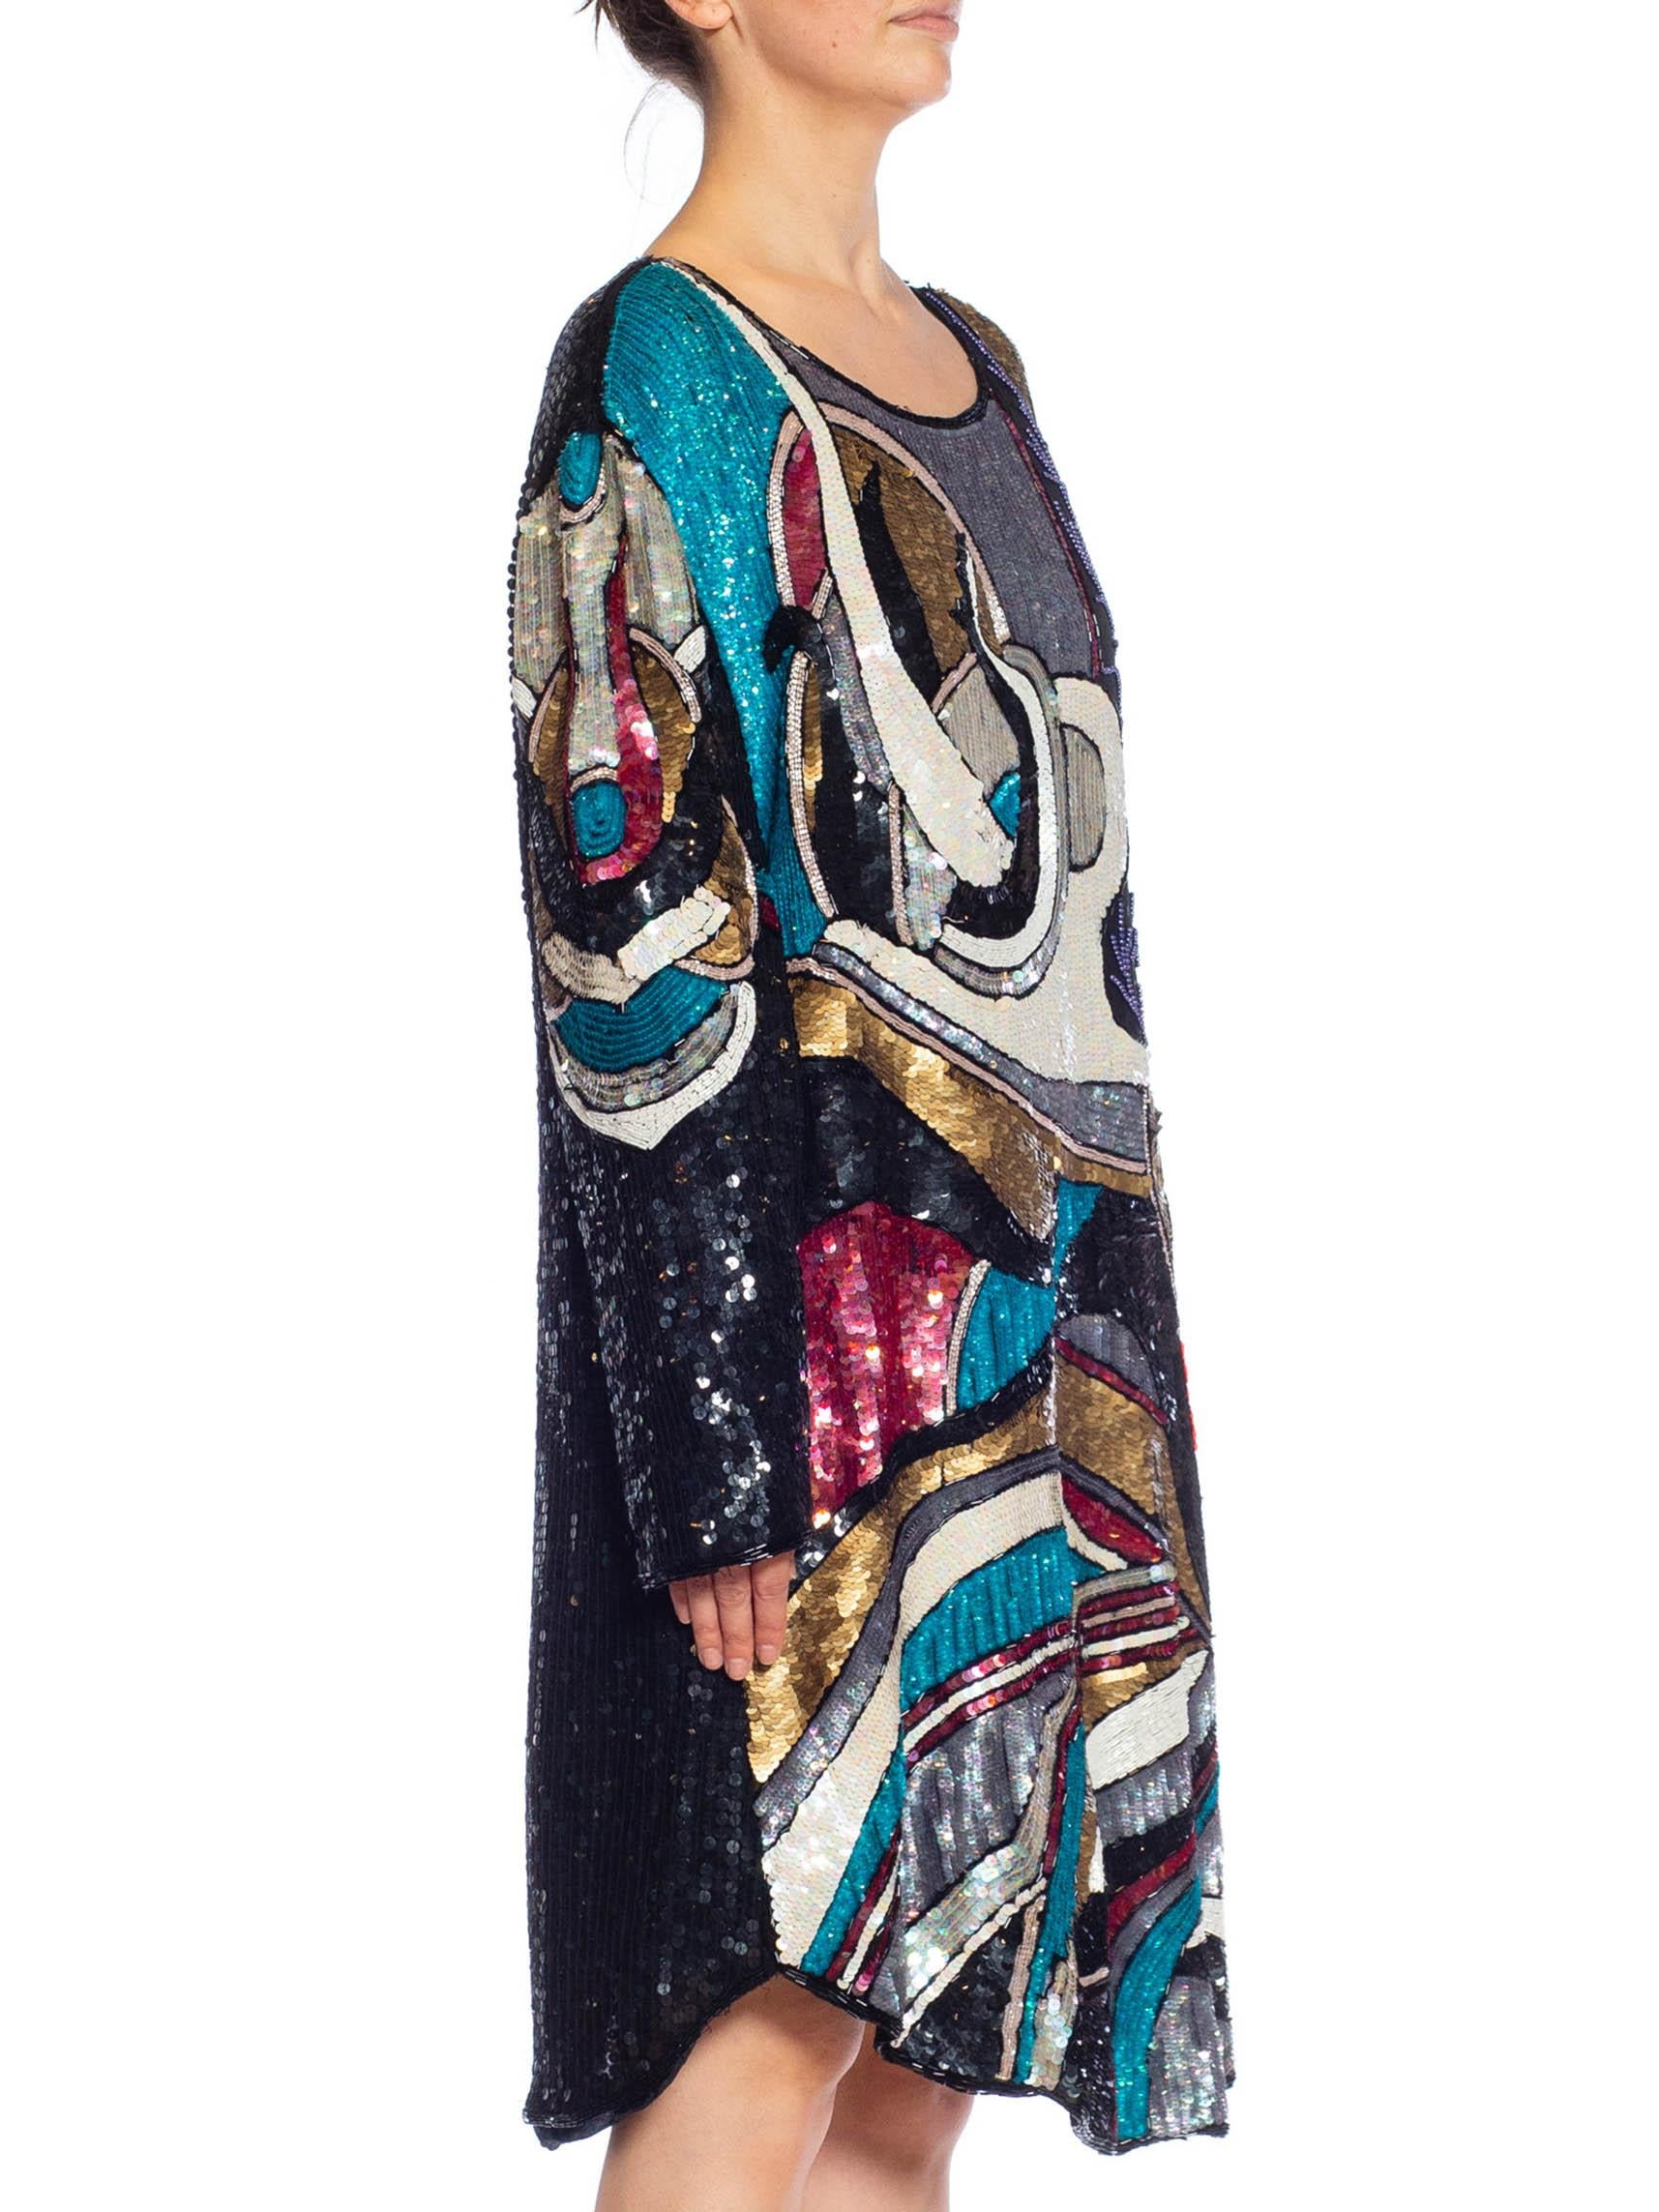 Women's 1980S Black & White Multicolored Beaded Silk Abstract Art Cocktail Dress For Sale